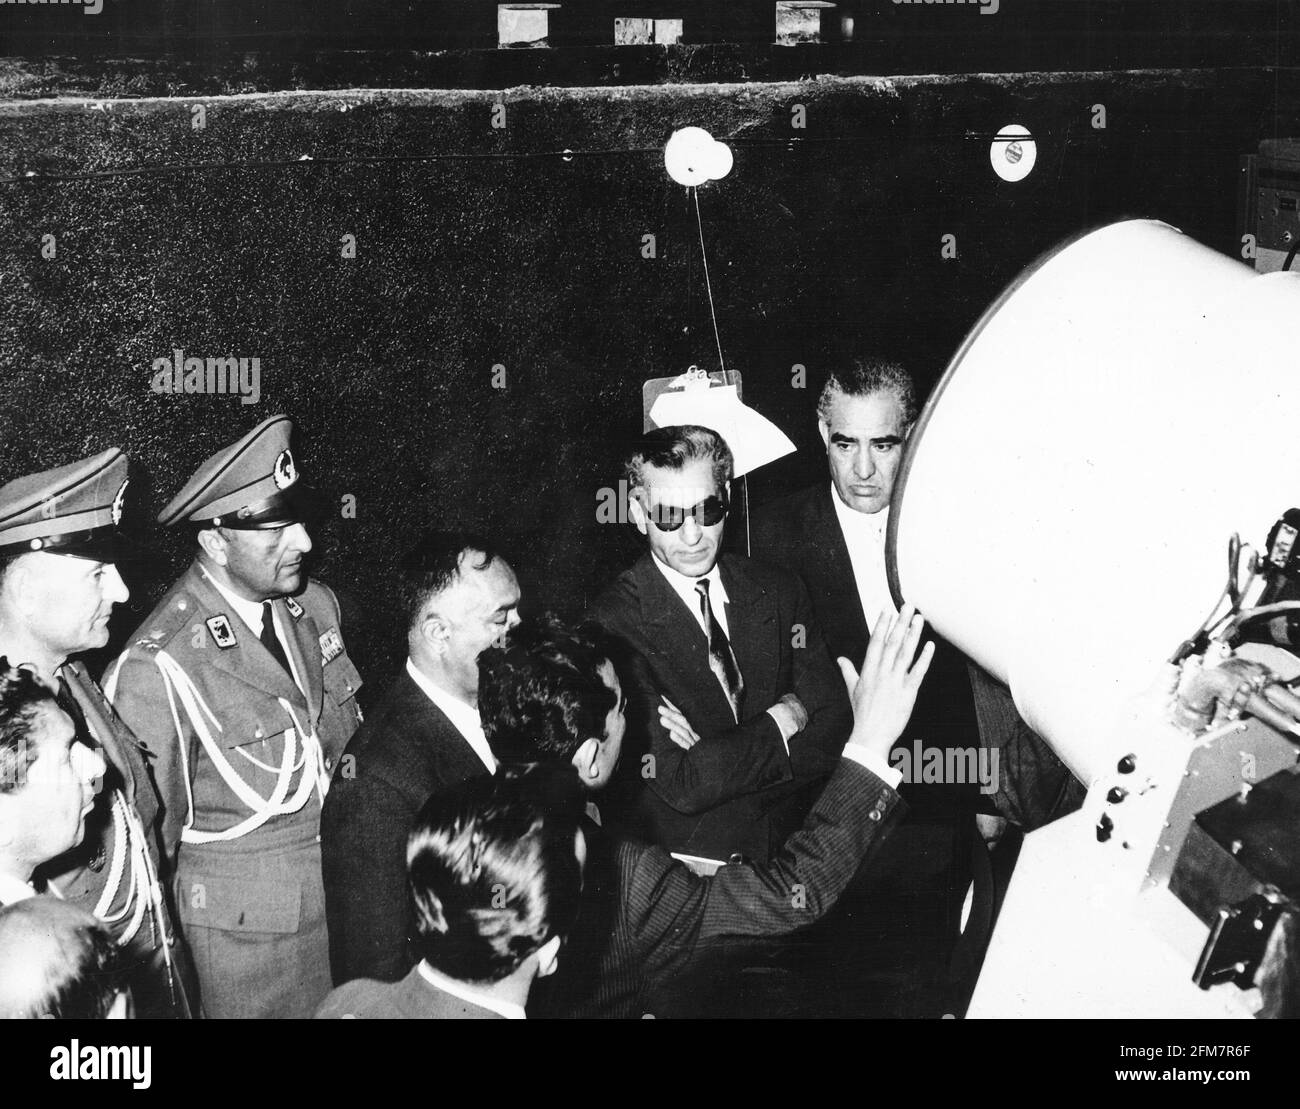 Operation of the Baker-Nunn camera at the station in Shiraz, Iran is explained to Mohammad Reza Pahlavi, the Shah of Iran, and his party on April 26, 1959. Baker-Nunn cameras are operated by the Smithsonian Astrophysical Observatory under a NASA grant to optically track and photograph spacecraft.Credit: NASA via CNP | usage worldwide Stock Photo